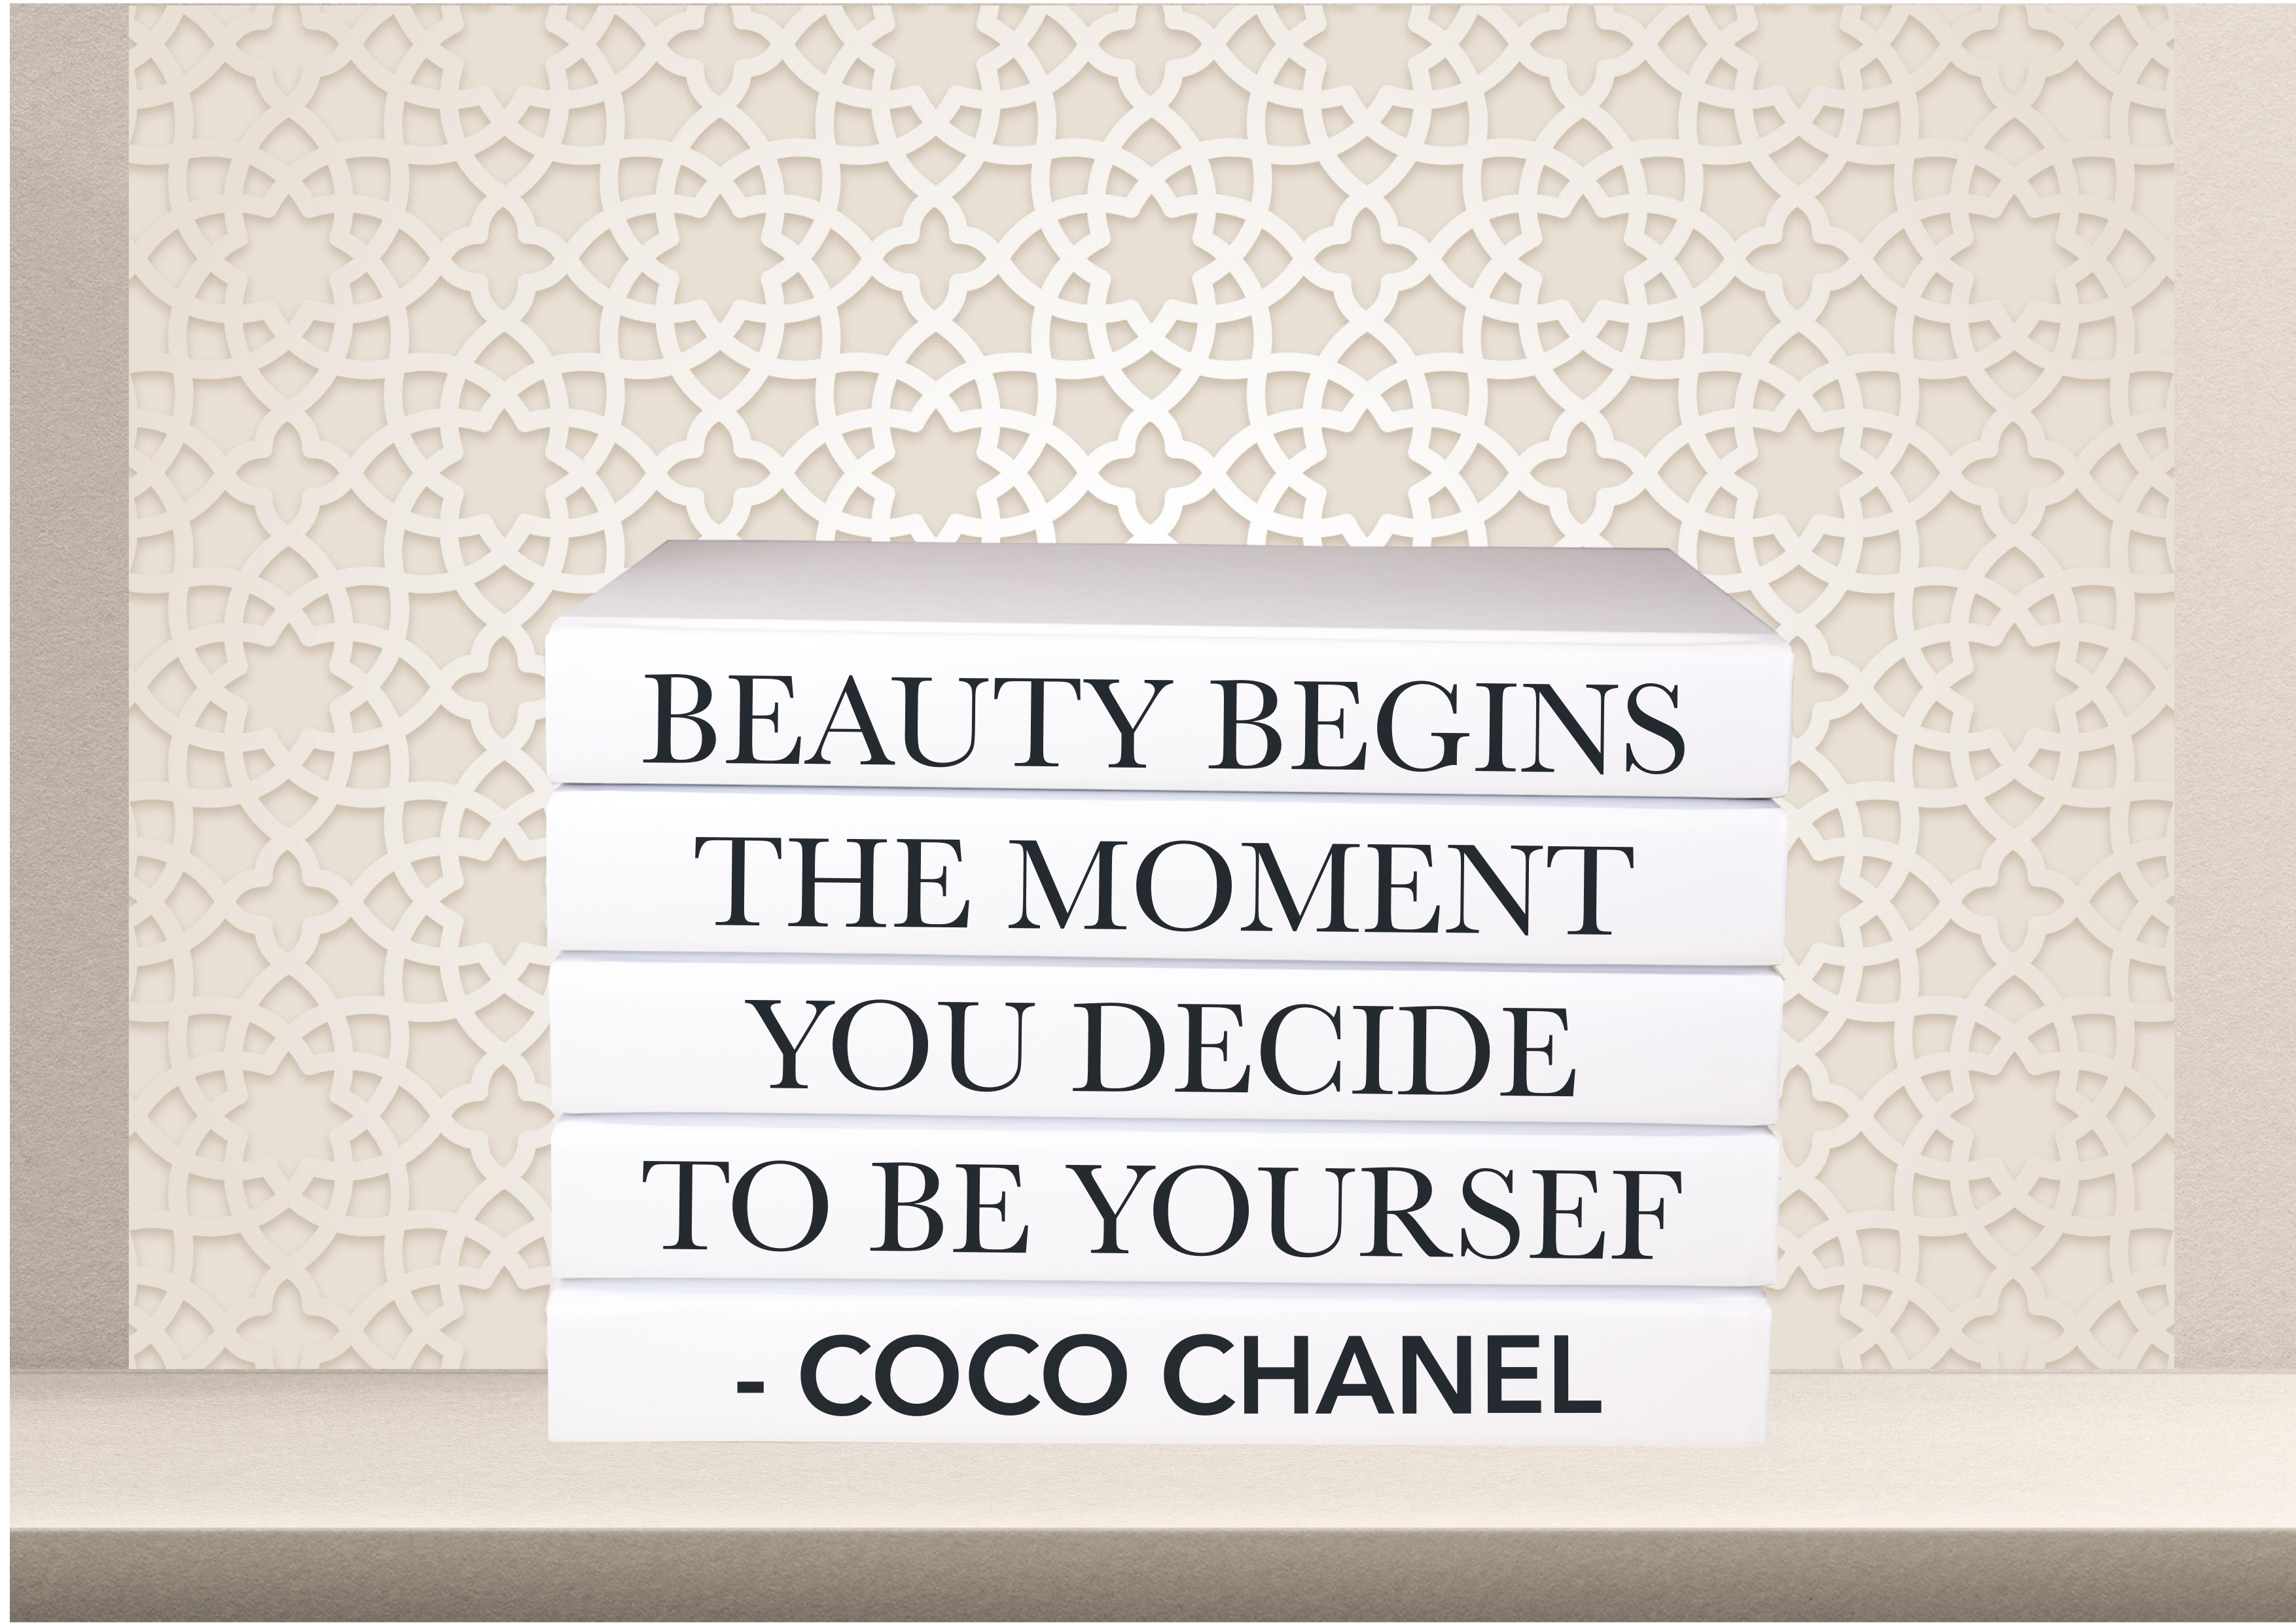 Coco Chanel Quote Beauty begins in the moment you decide to be yourself